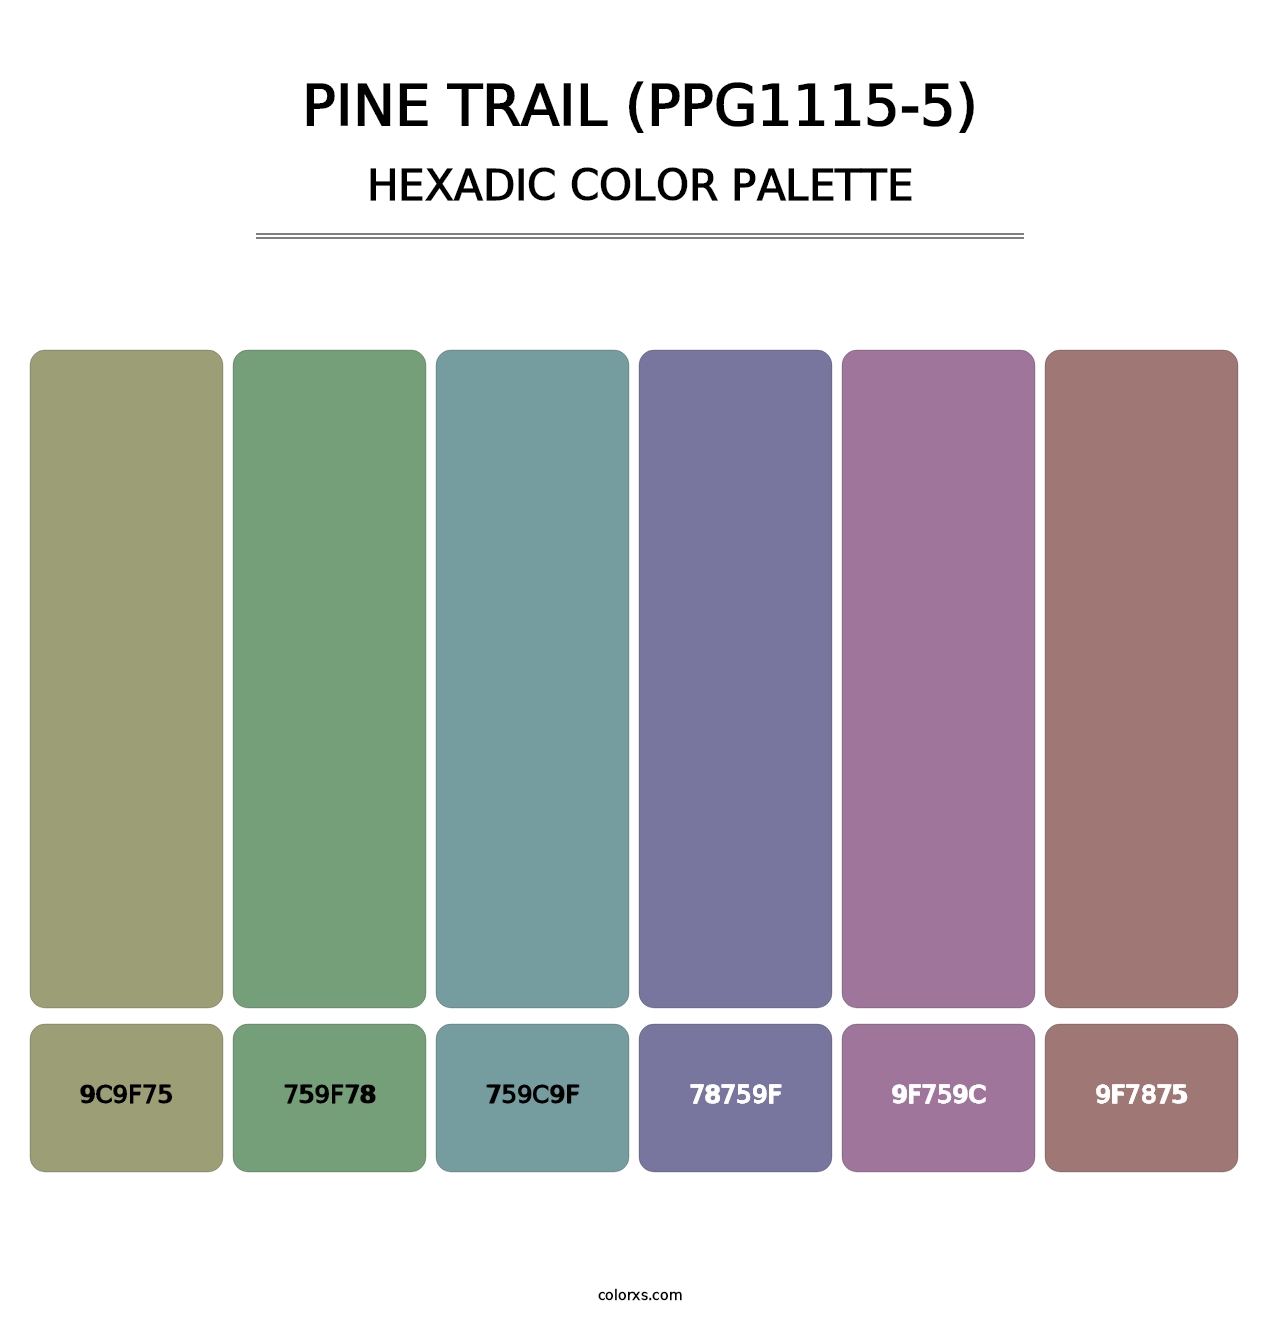 Pine Trail (PPG1115-5) - Hexadic Color Palette